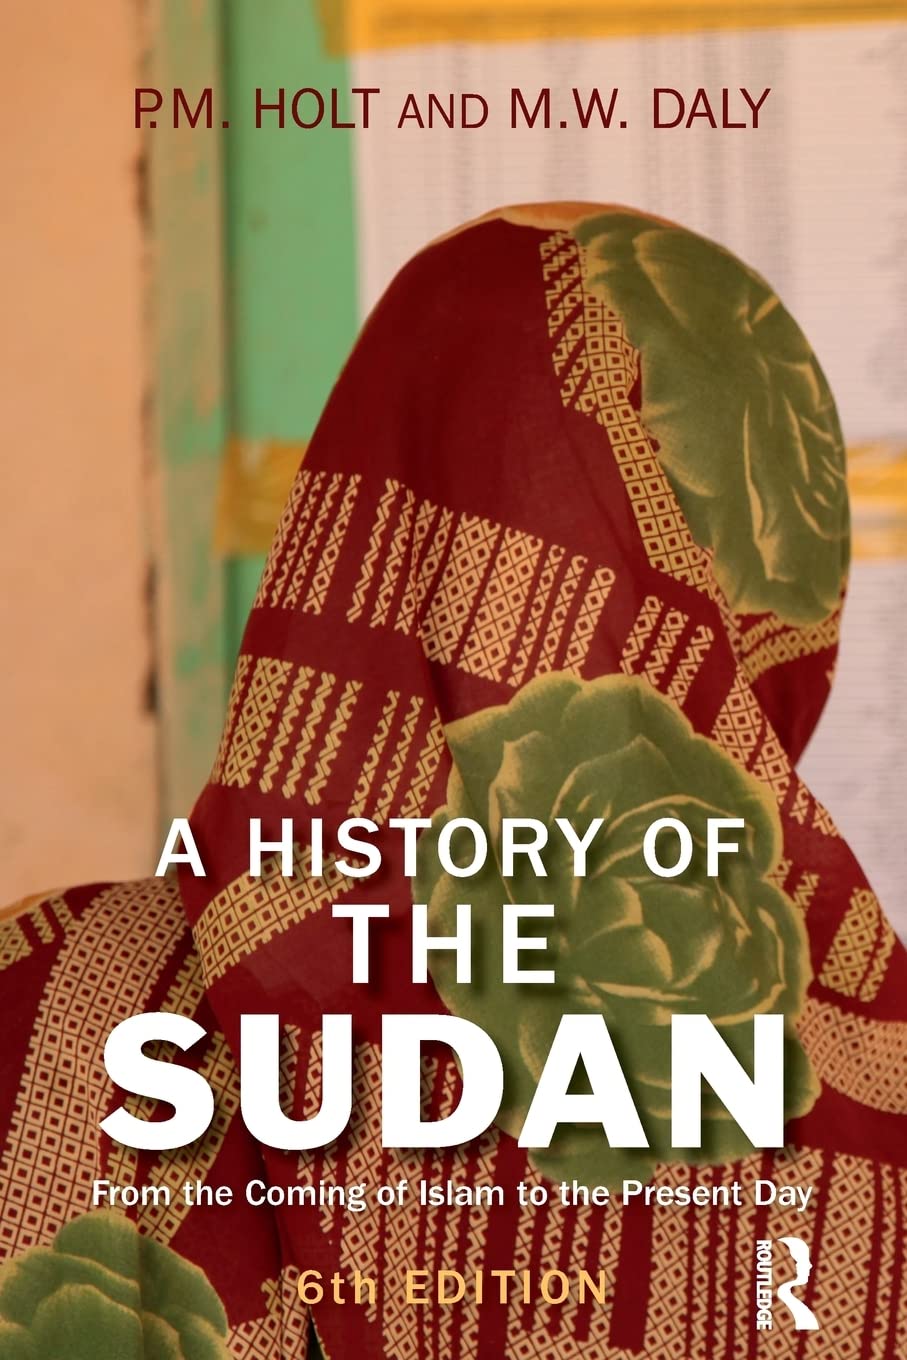 A History of the Sudan: From the Coming of Islam to the Present Day (Paperback)